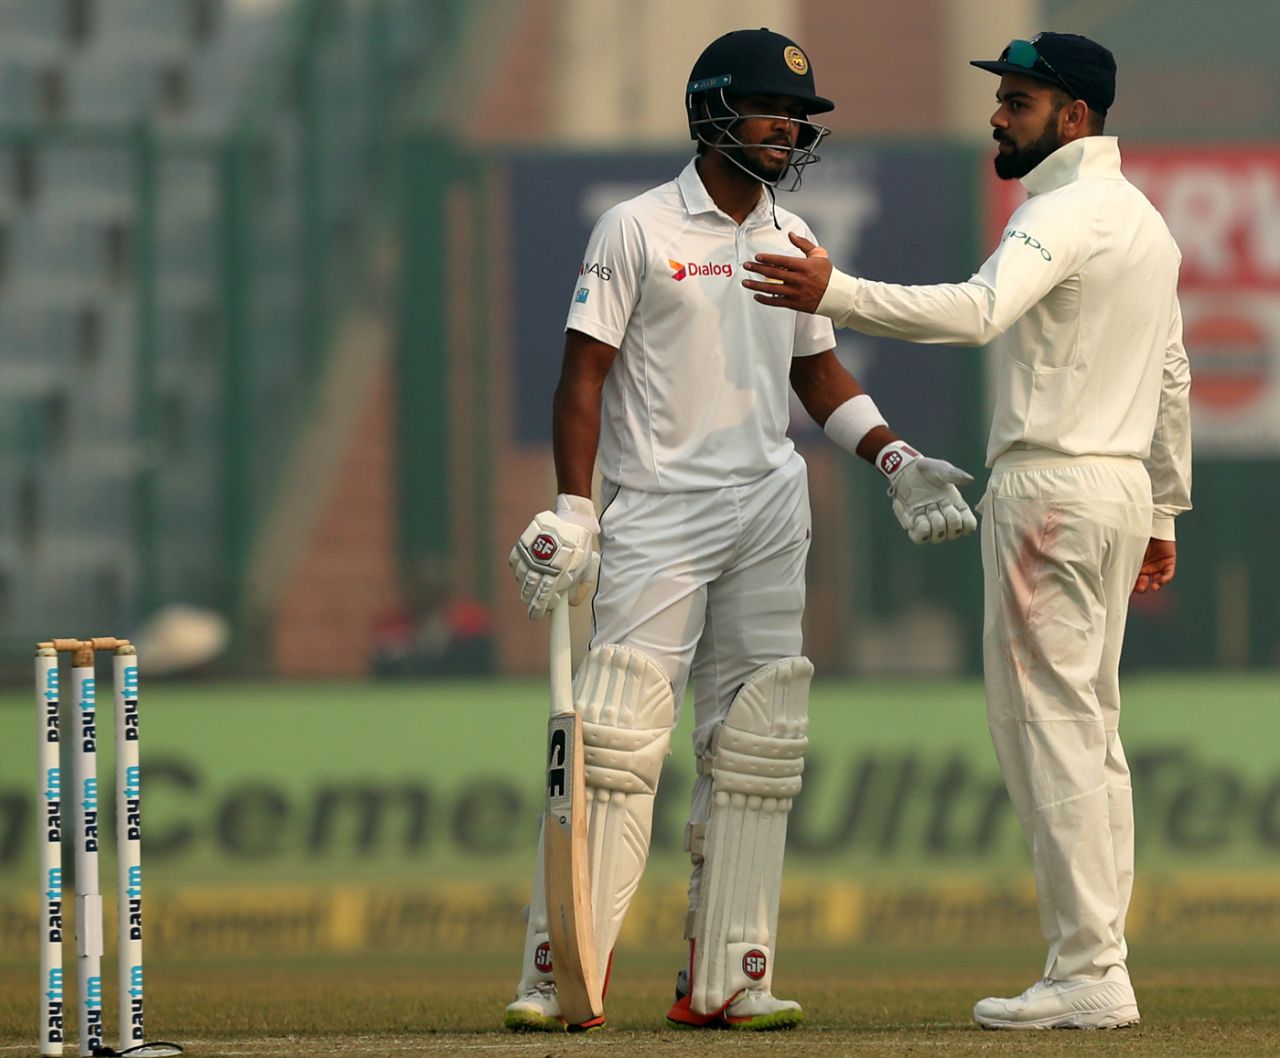 Dinesh Chandimal and Virat Kohli had an animated chat after the Sri Lanka physio was summoned onto the field, India v Sri Lanka, 3rd Test, Delhi, 3rd day, December 4, 2017